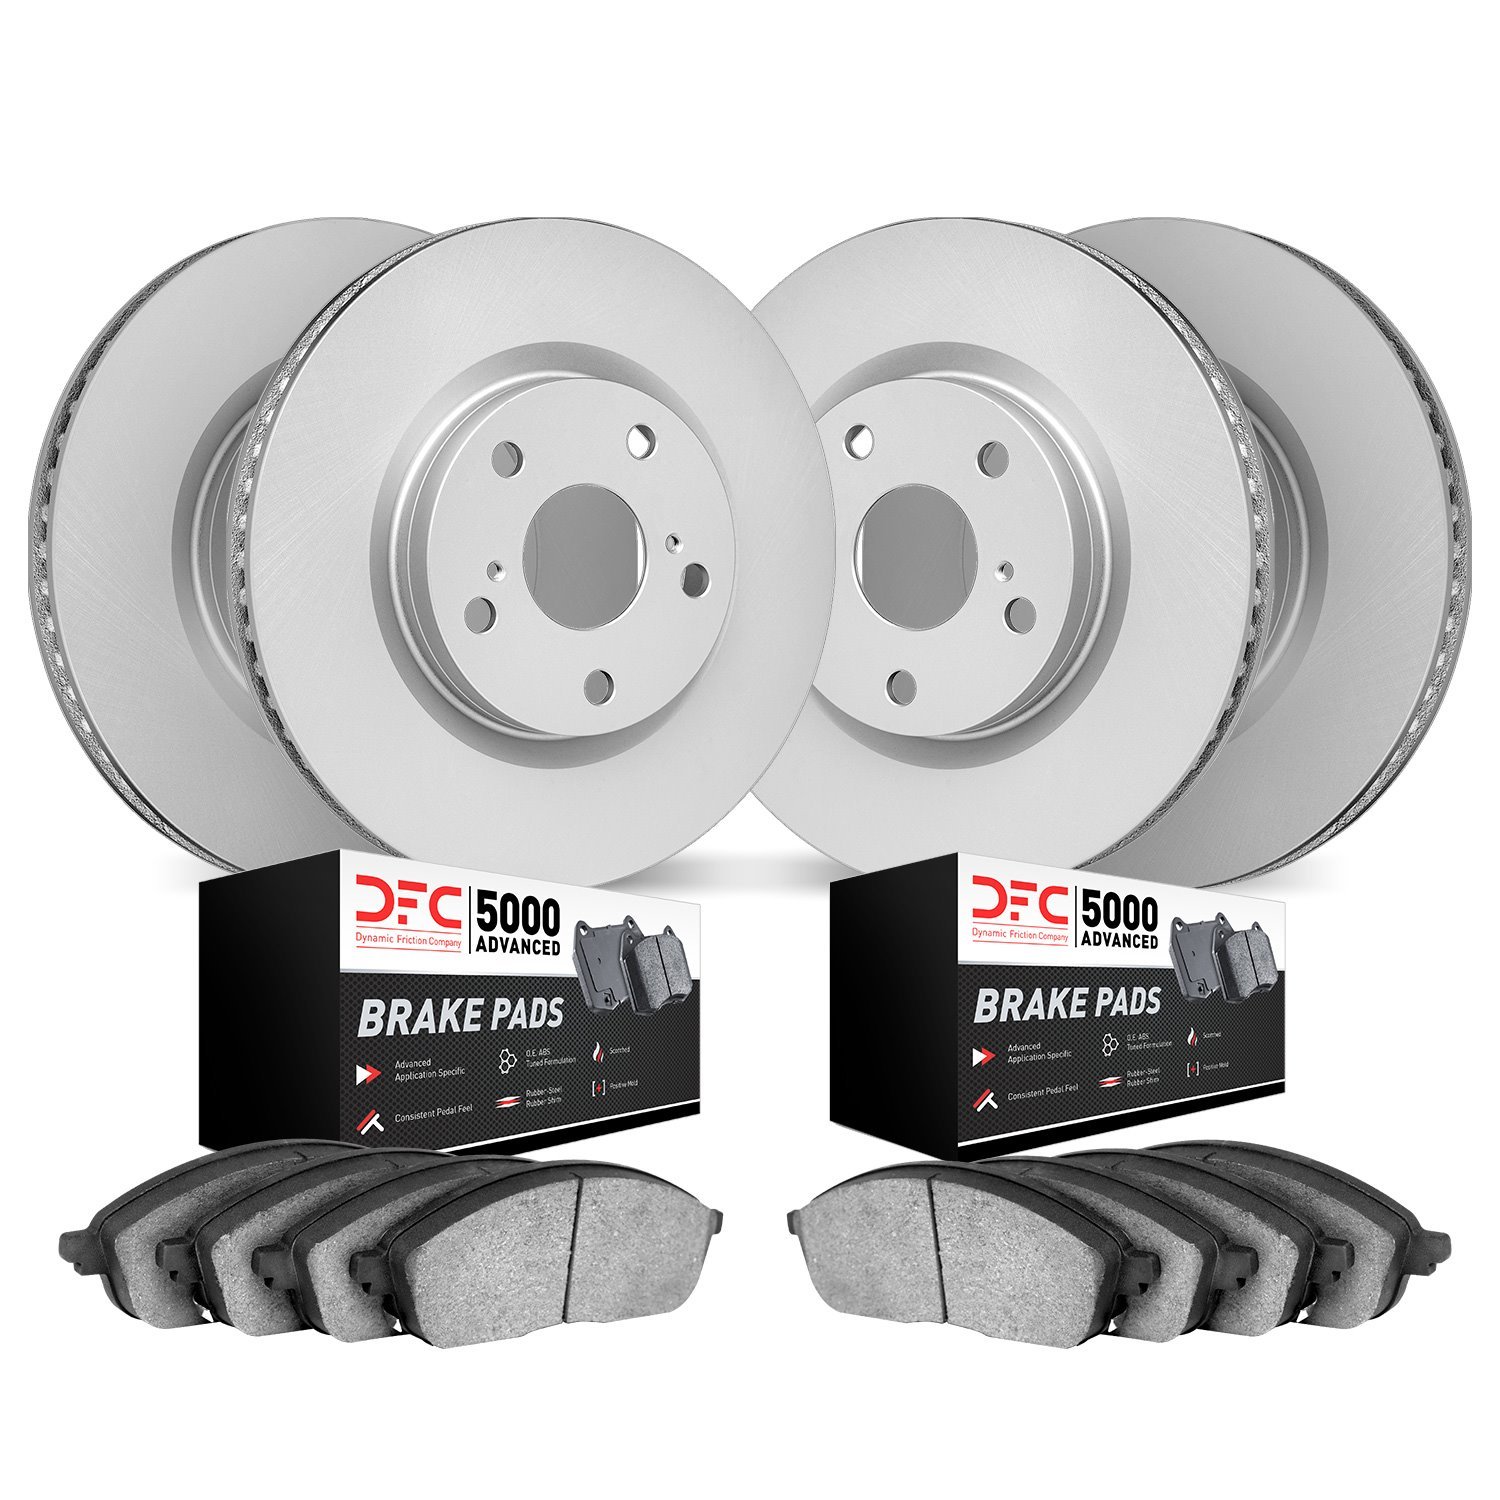 4504-46027 Geospec Brake Rotors w/5000 Advanced Brake Pads Kit, 2014-2019 GM, Position: Front and Rear